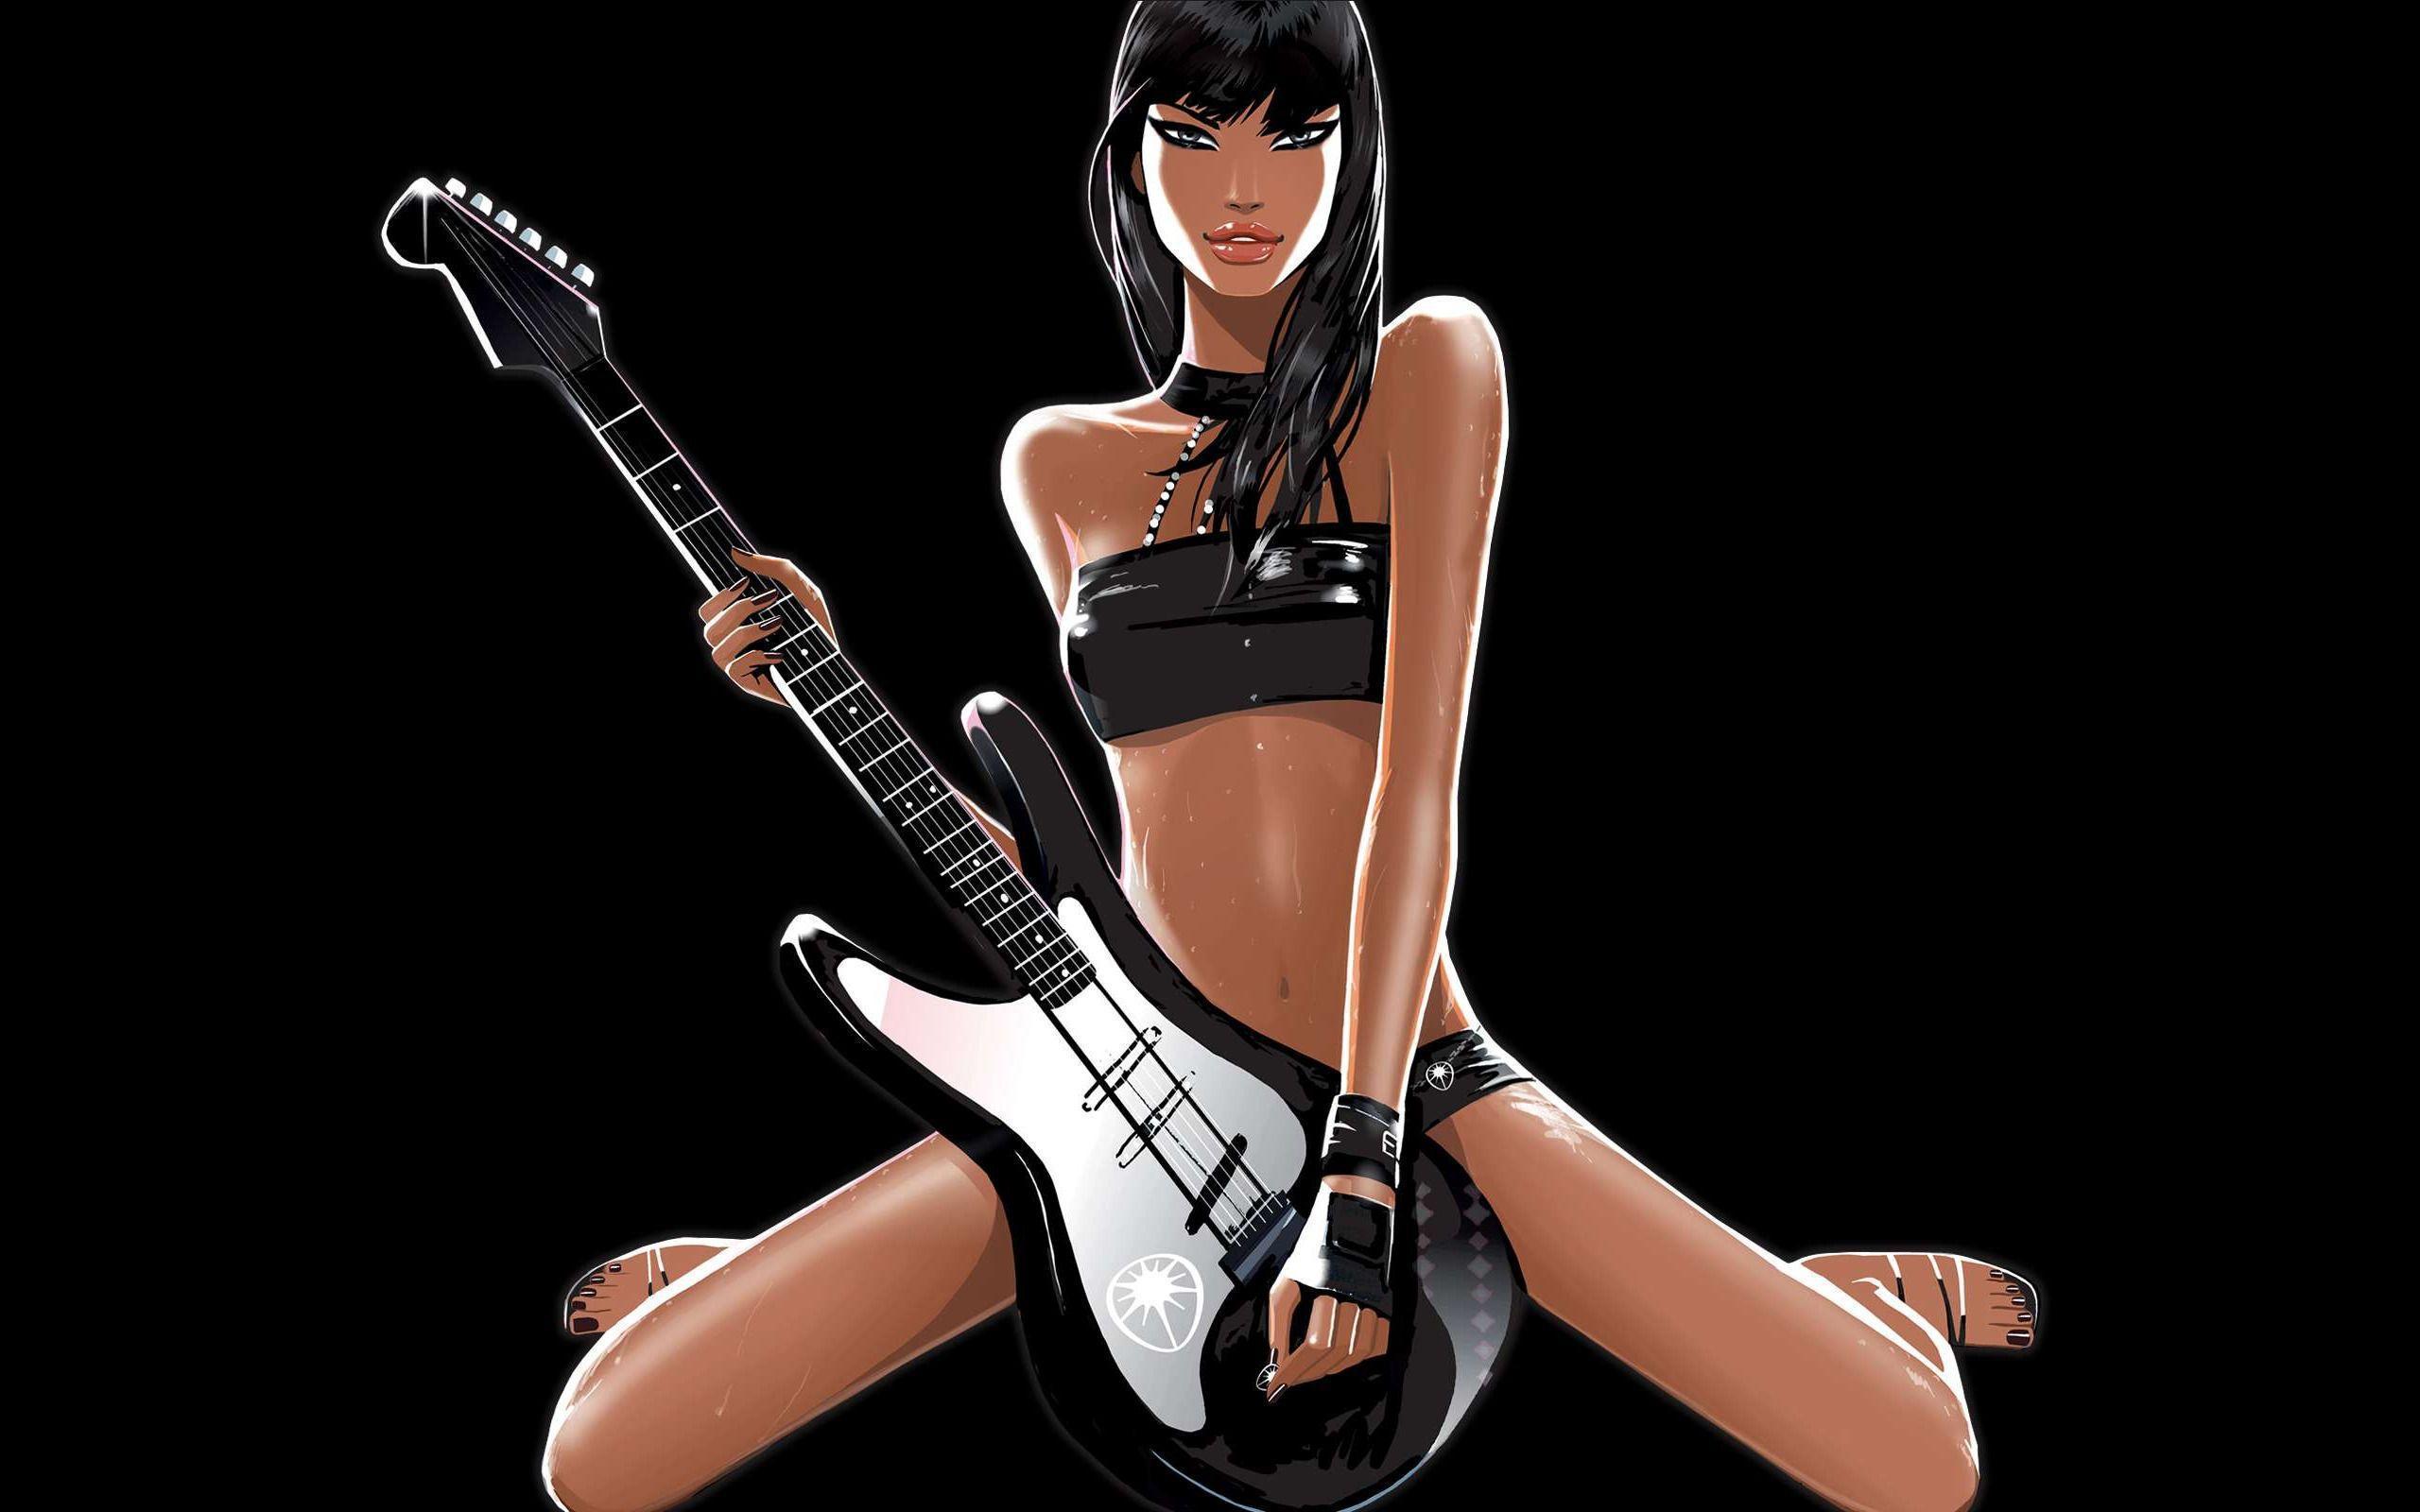 Rock girl wallpaper for free download about (461) wallpaper